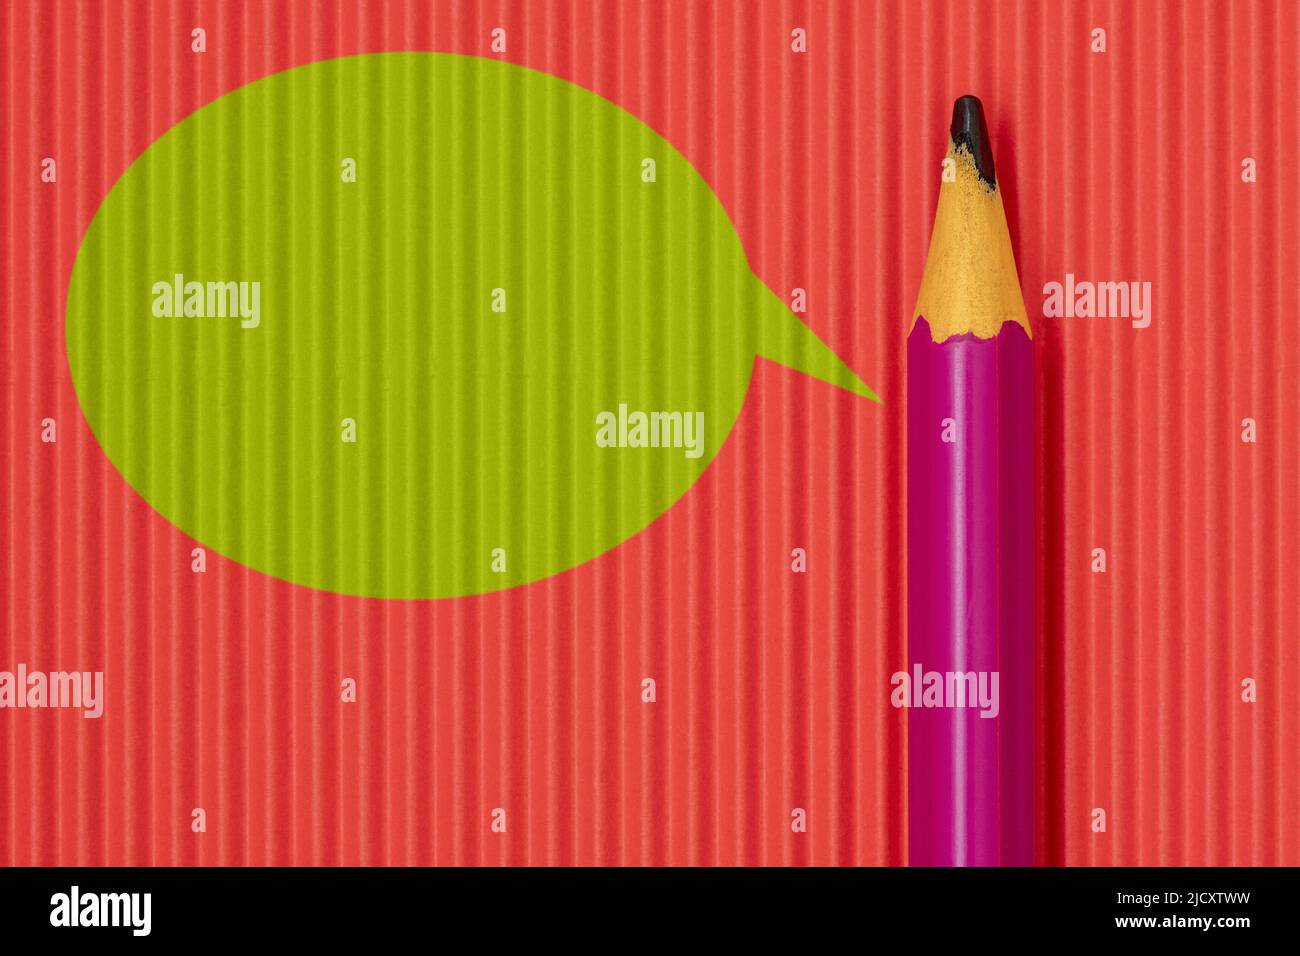 Purple pencil on red paper background with green speech bubble Stock Photo